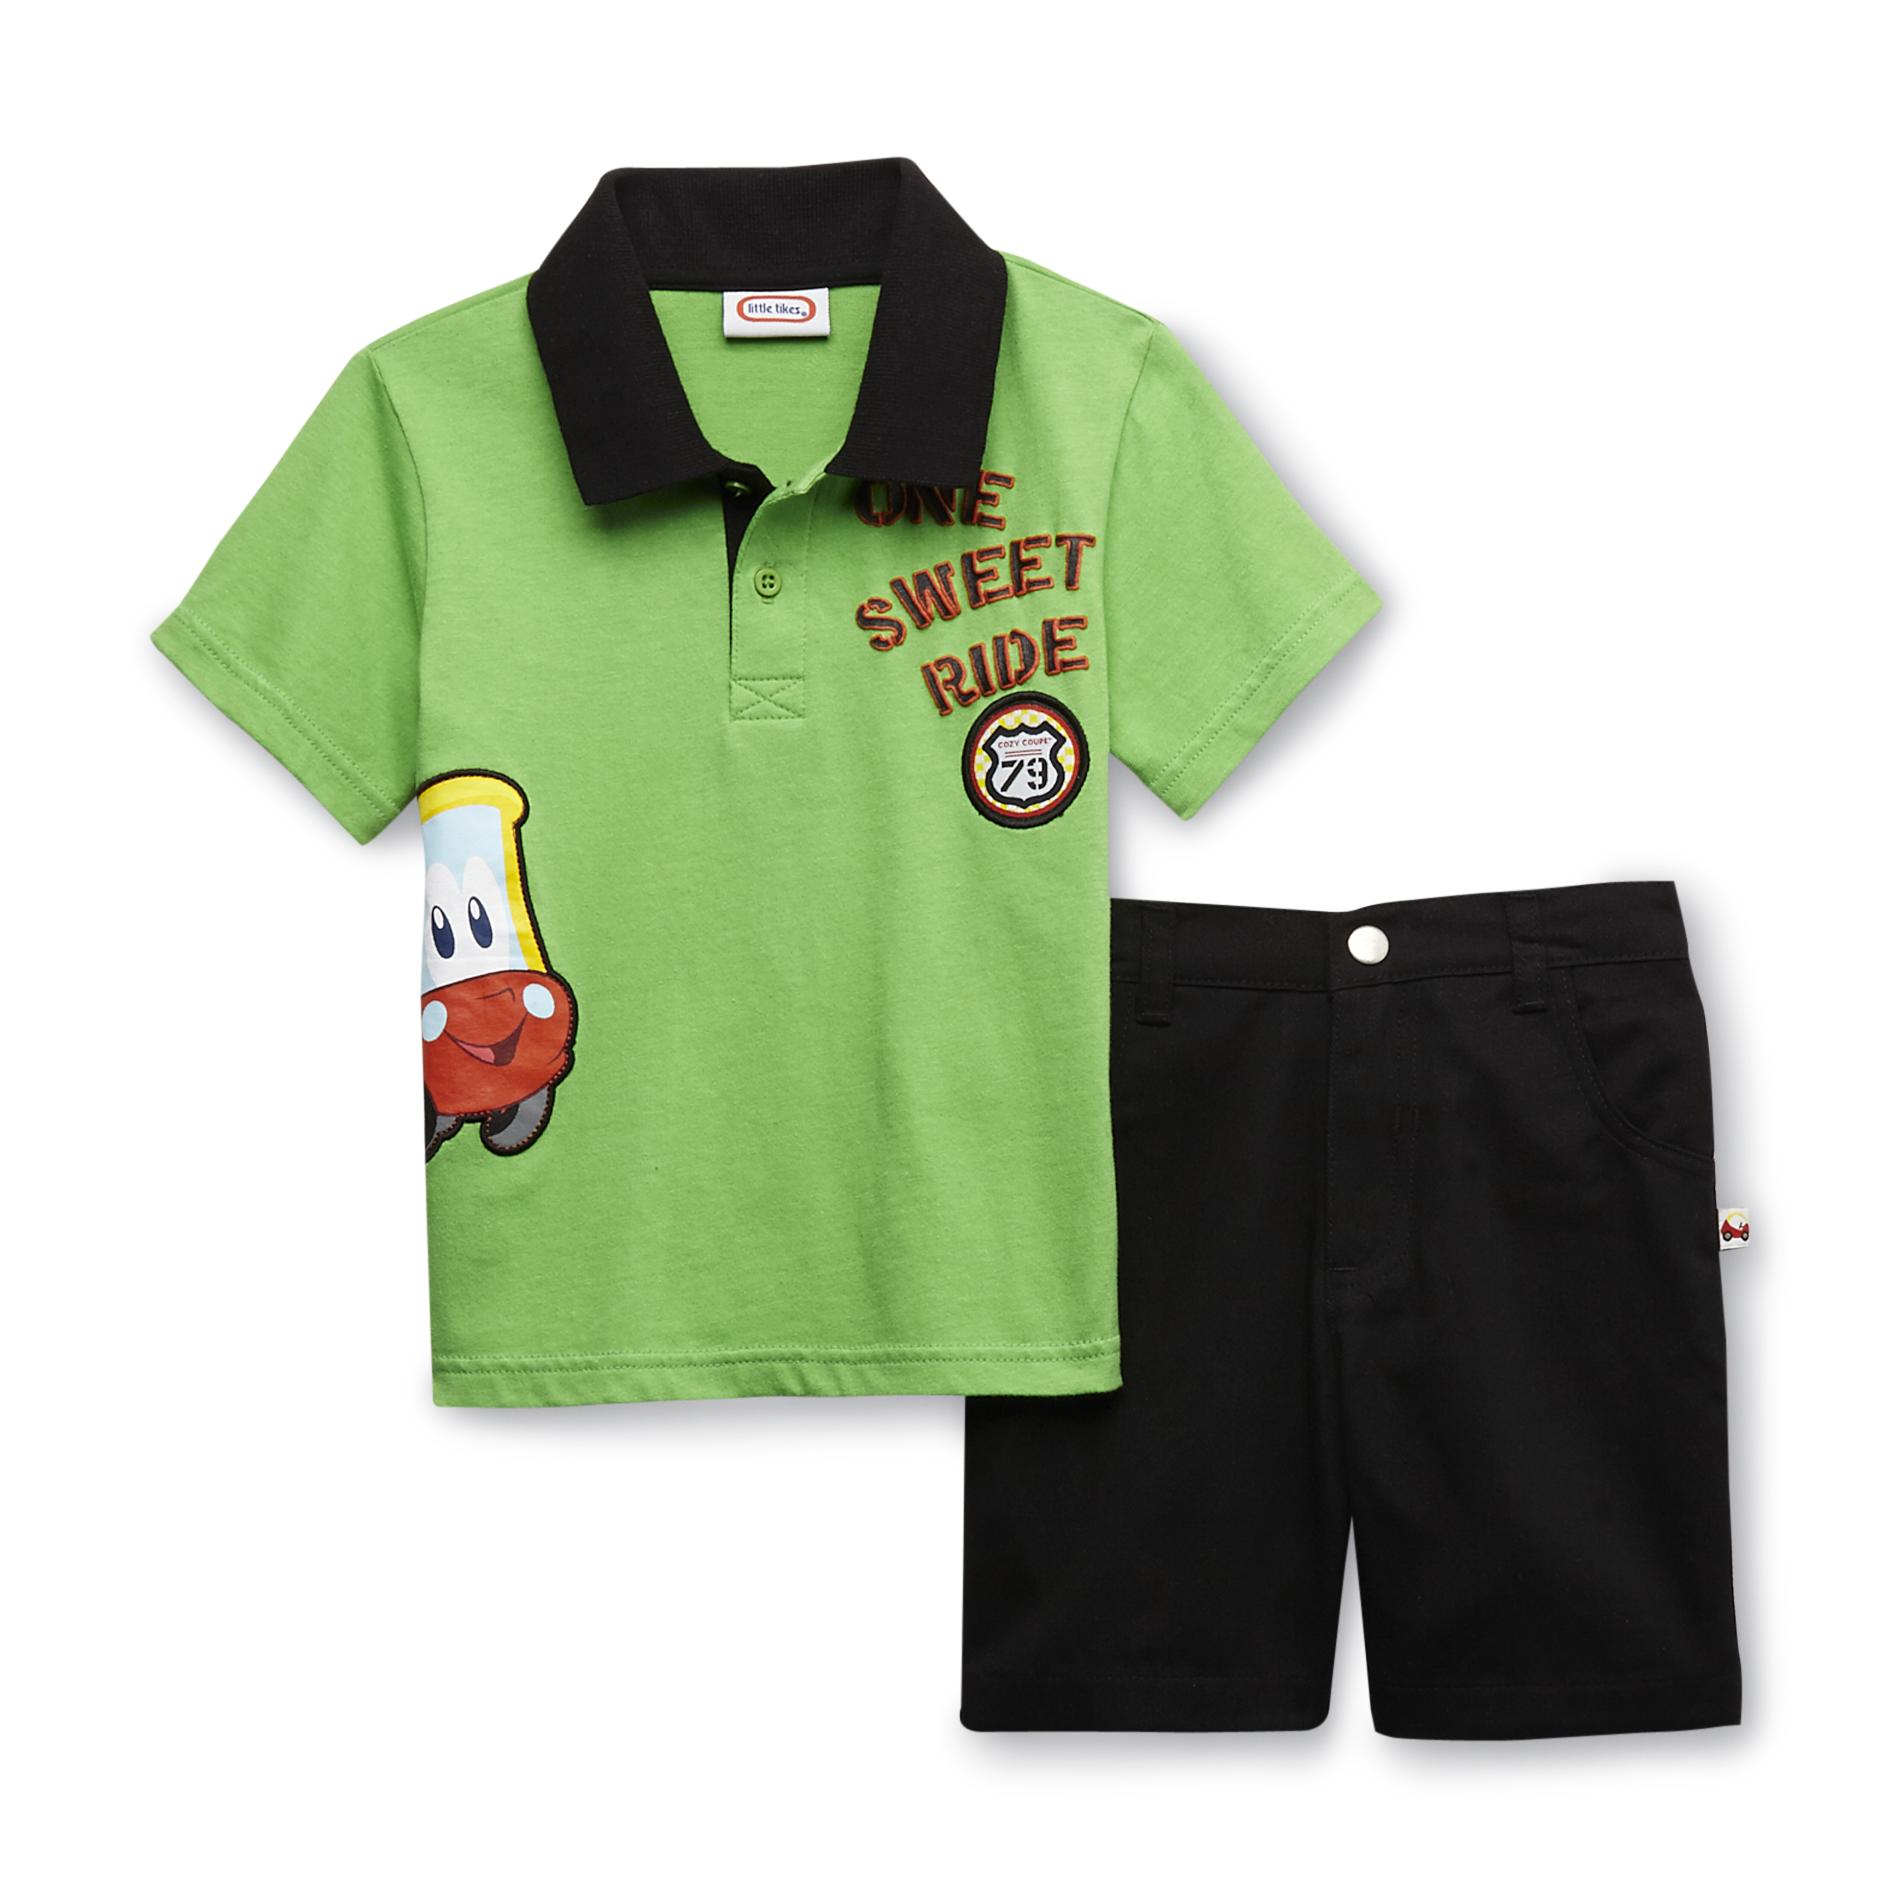 Little Tikes Toddler Boy's Polo Shirt & Twill Shorts - One Sweet Ride